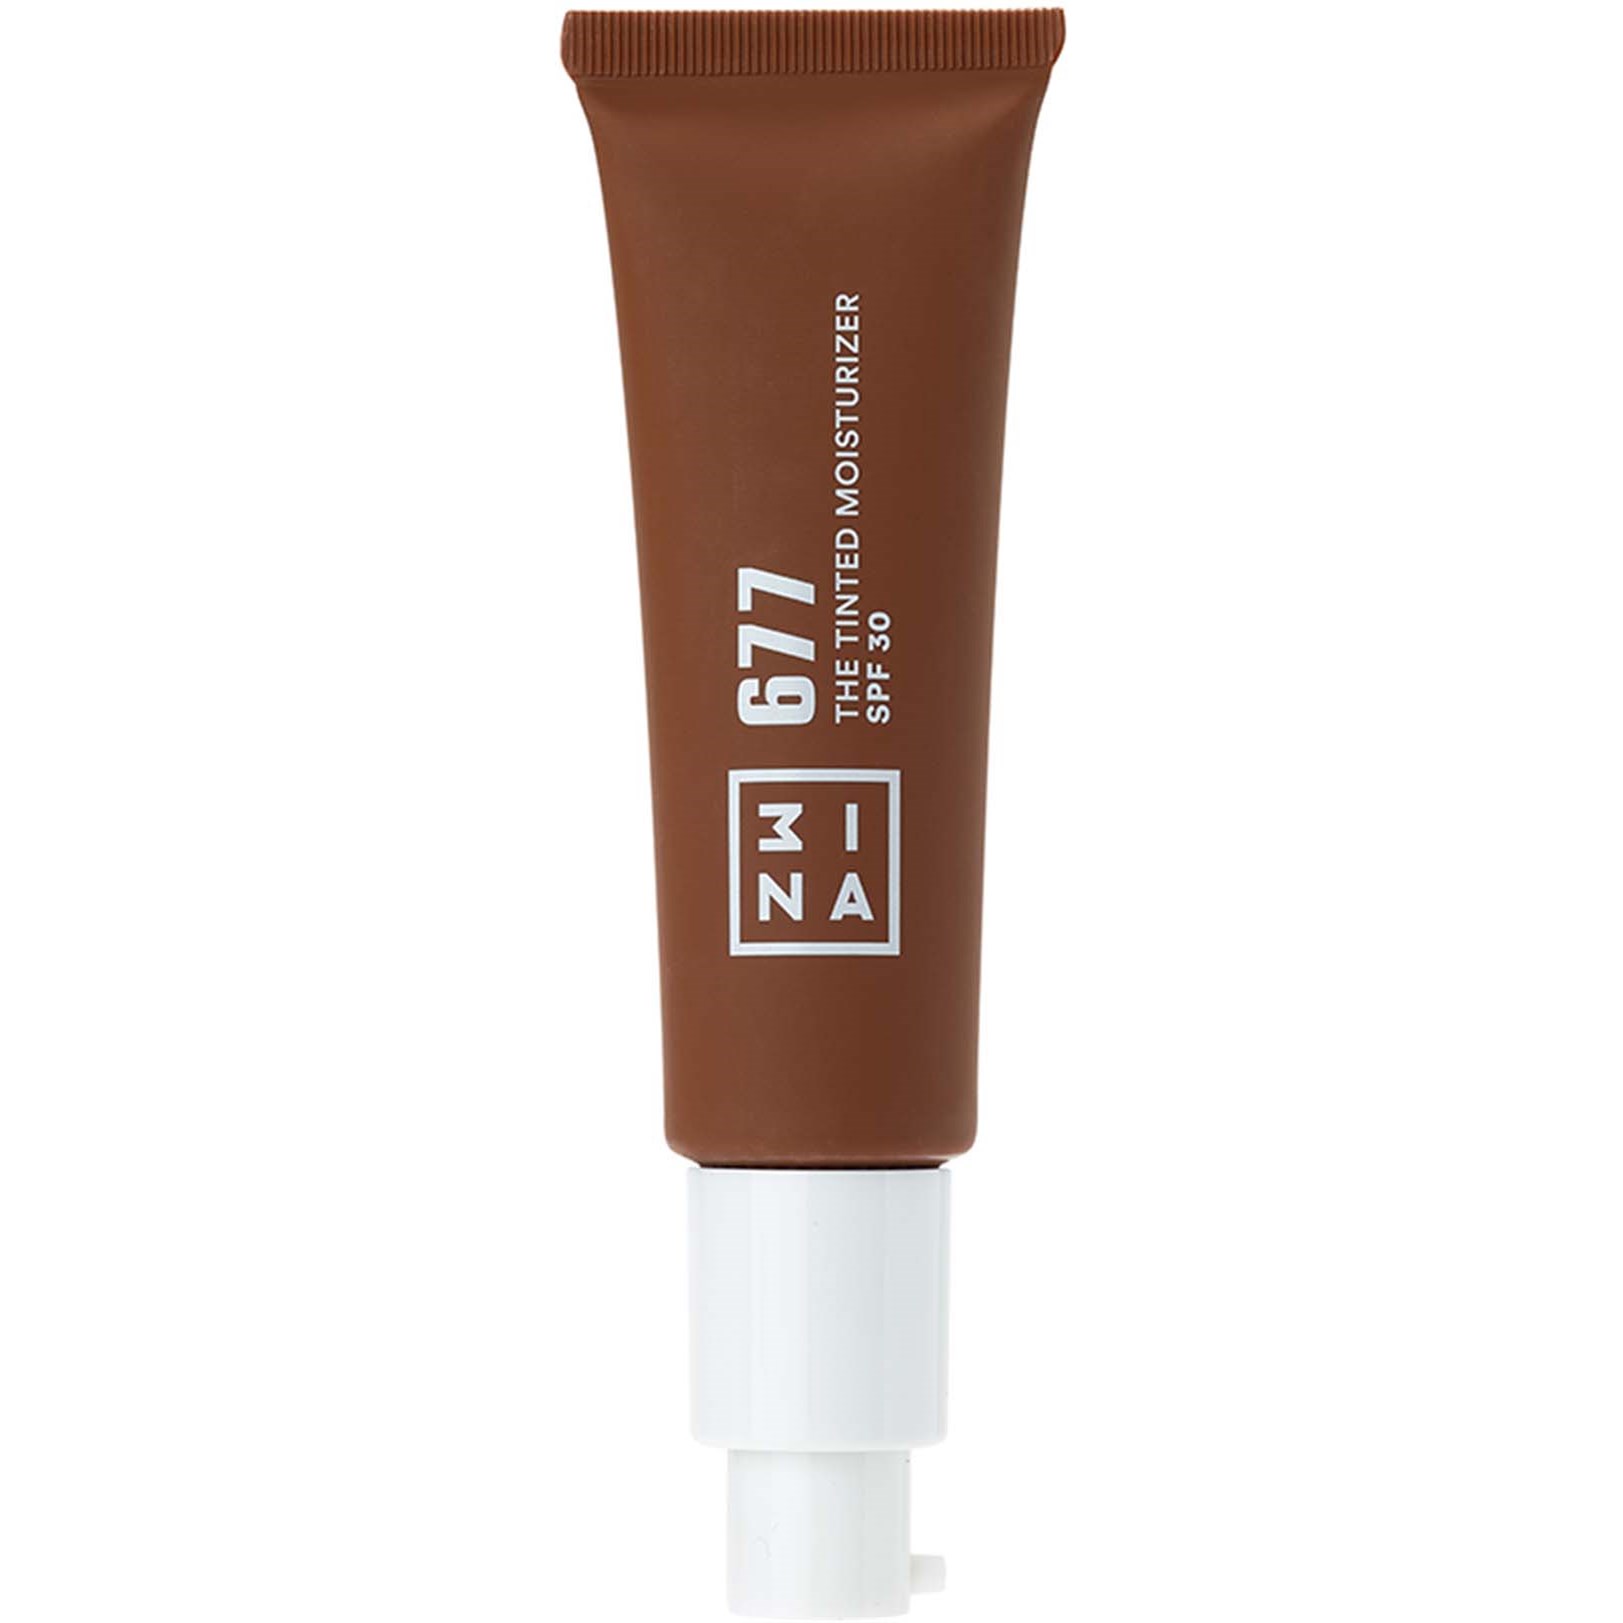 3INA The Tinted Moisturizer SPF30 677